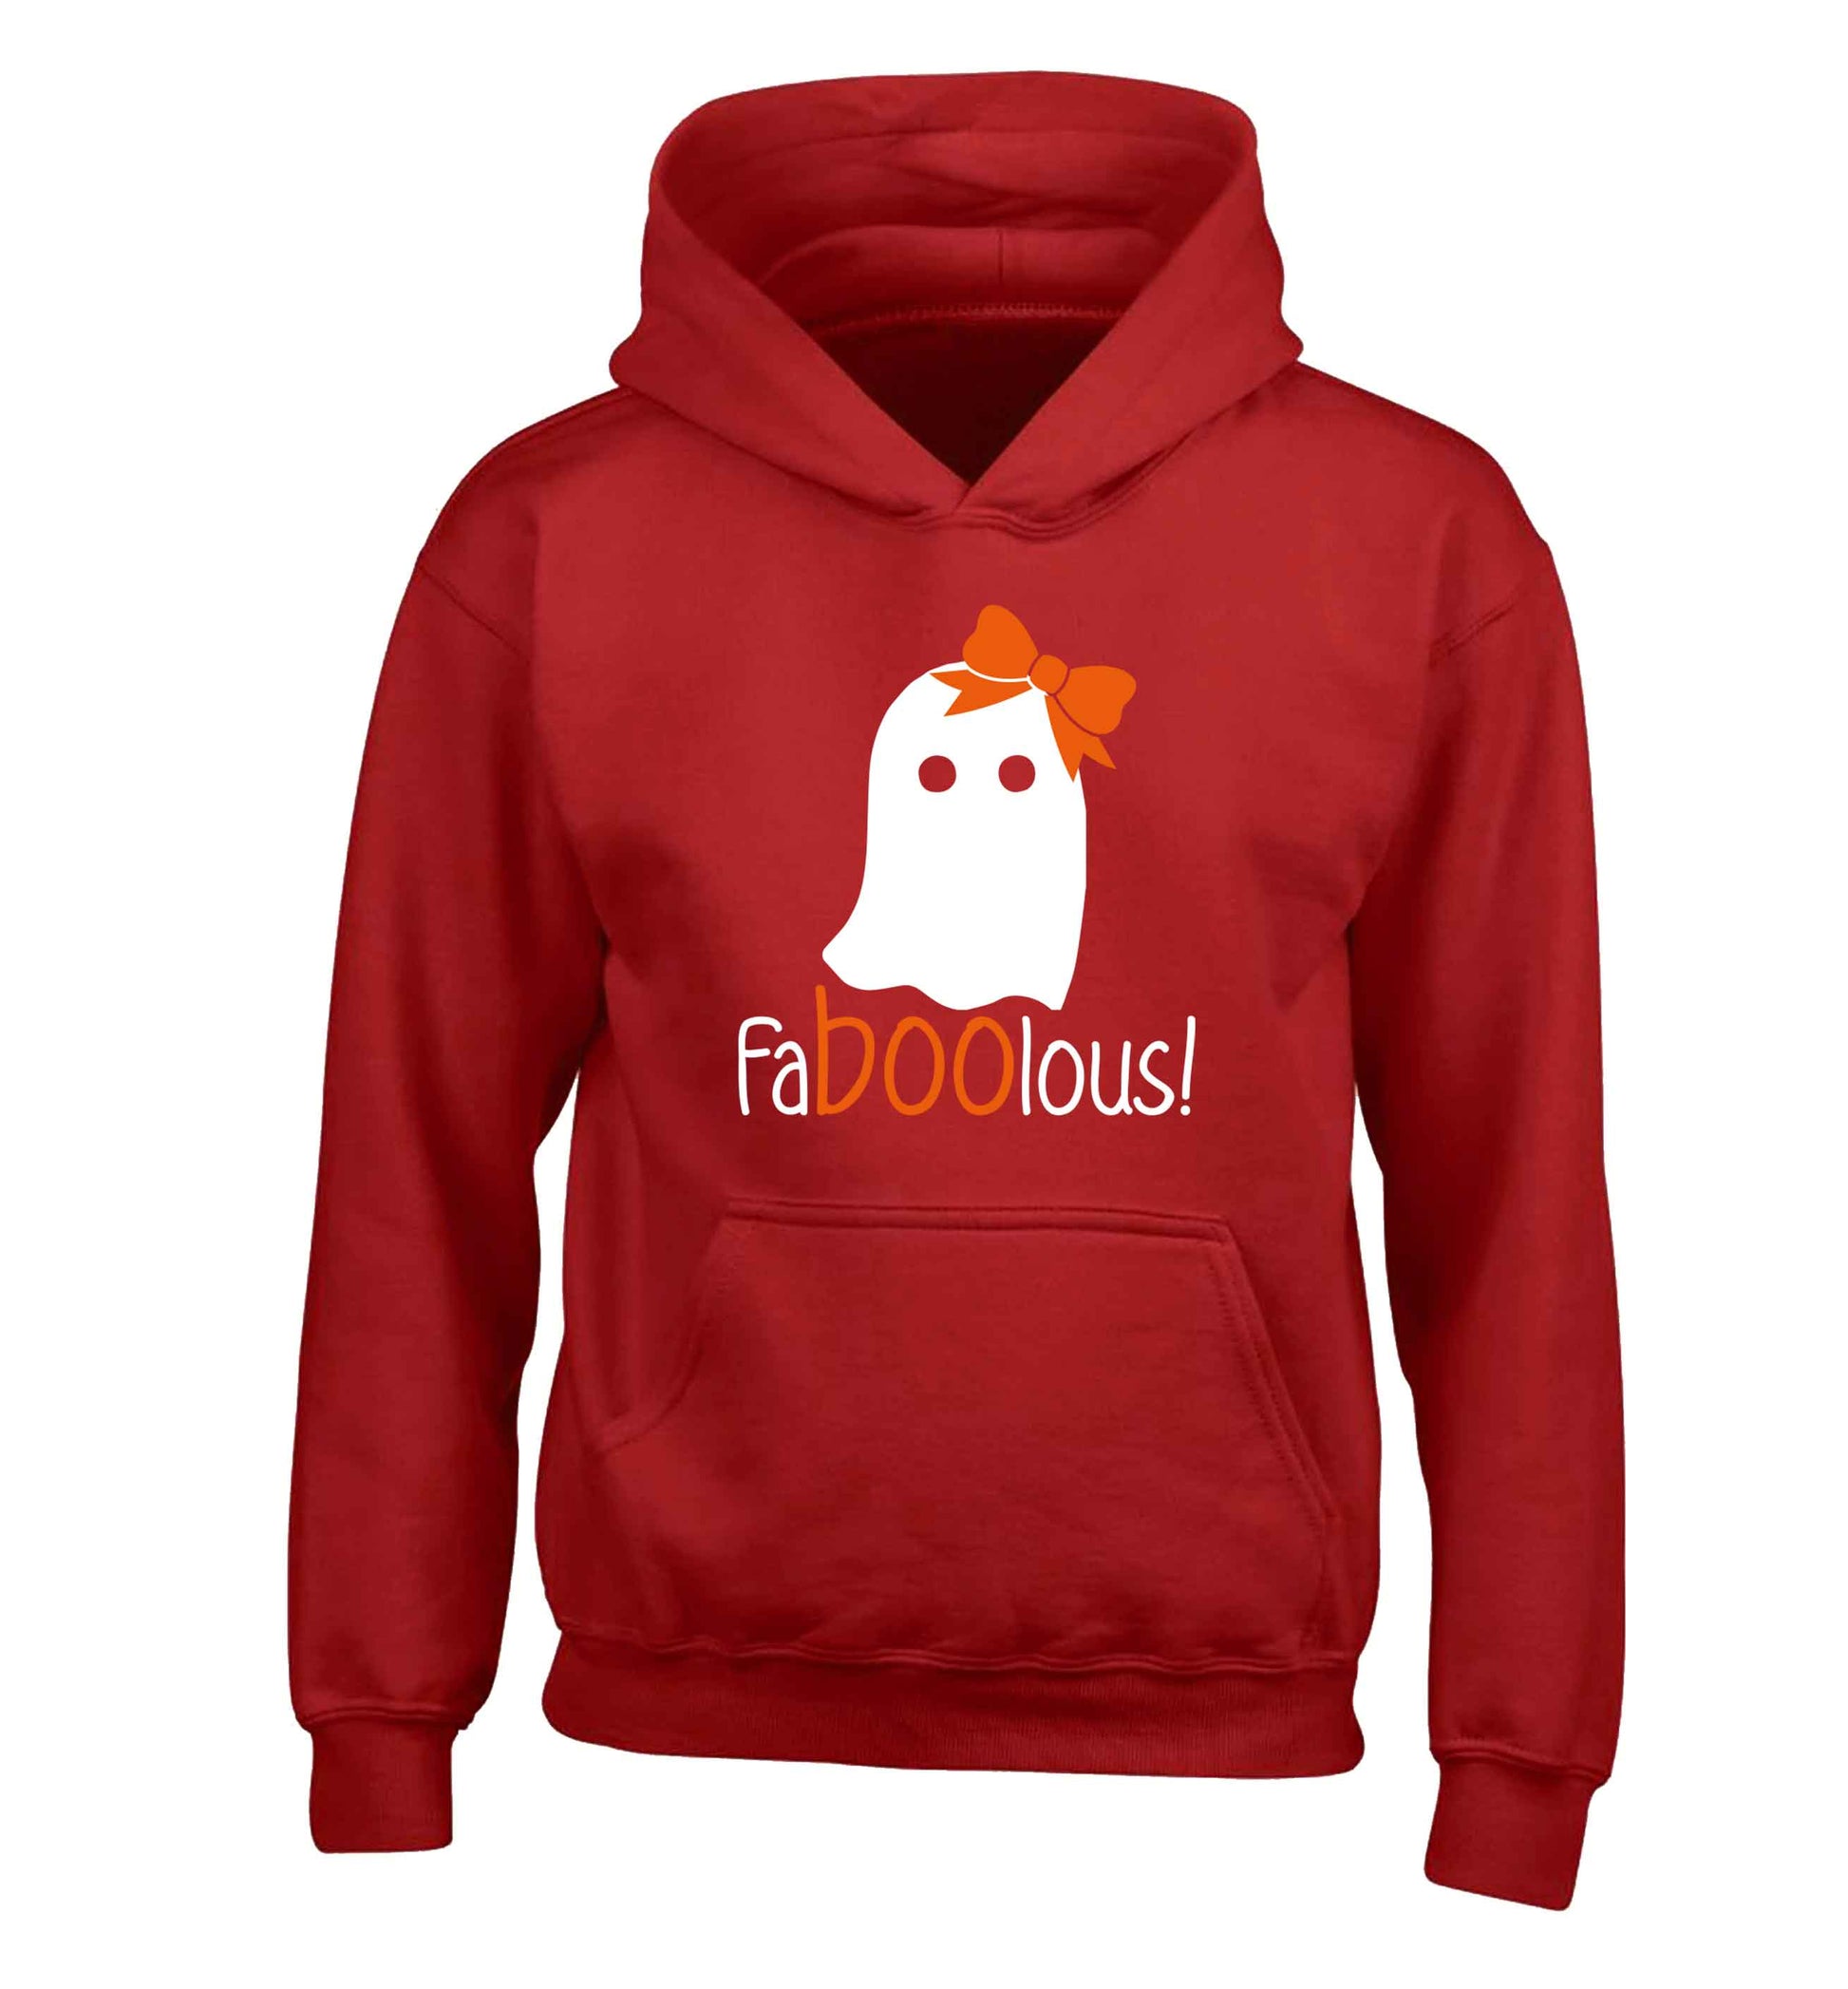 Faboolous ghost children's red hoodie 12-13 Years